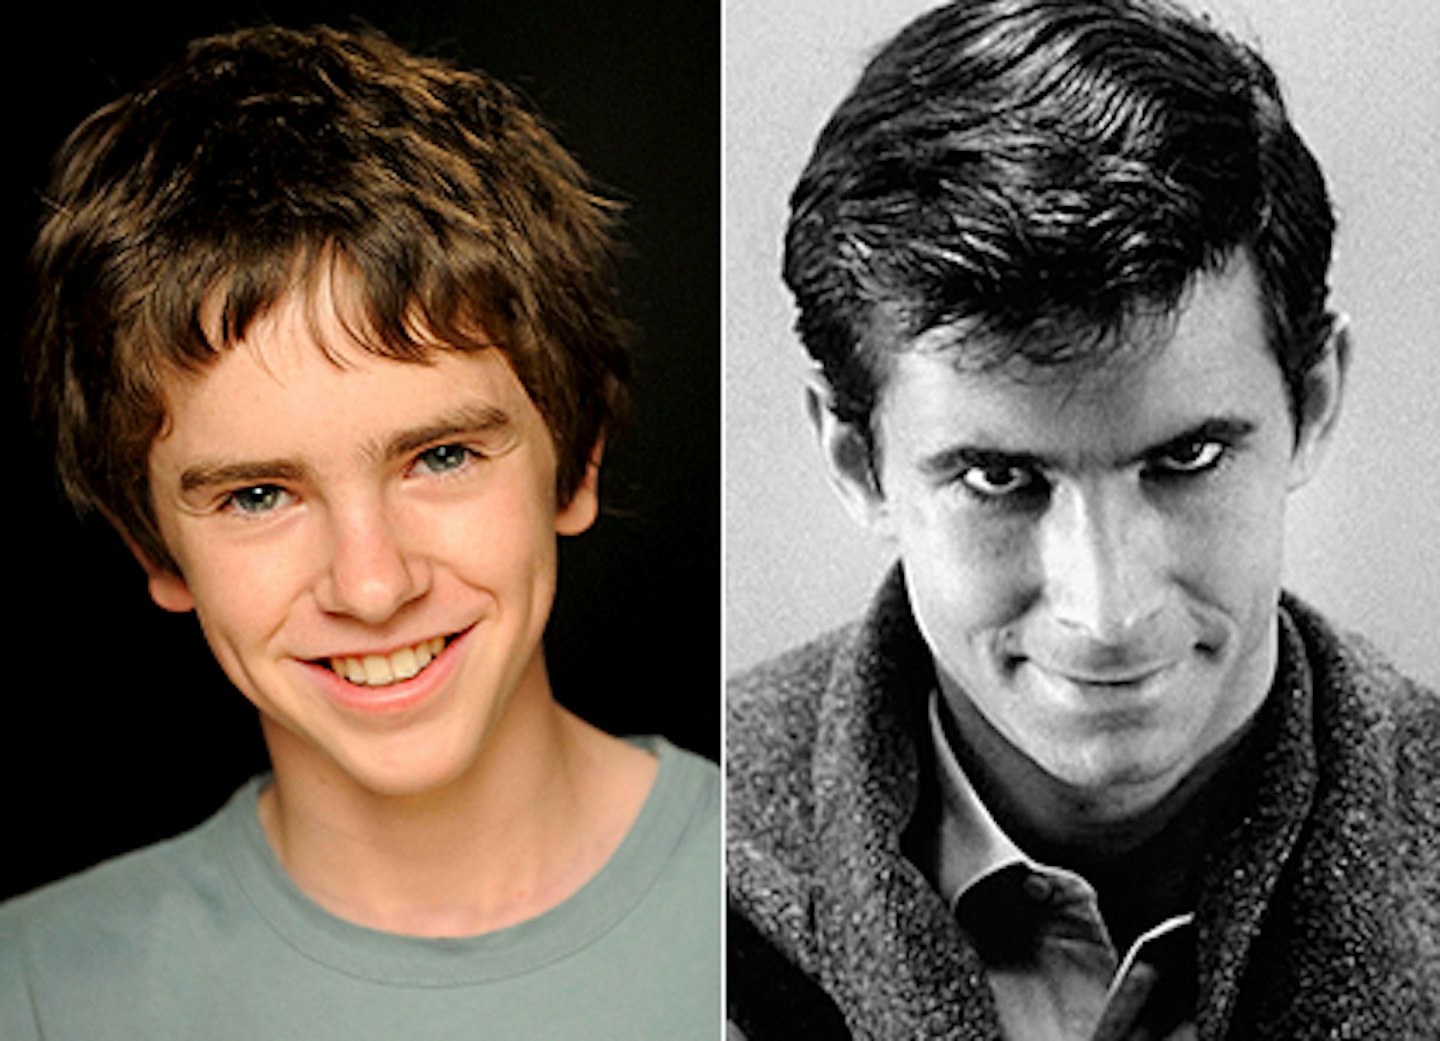 https://images.bauerhosting.com/legacy/empire-legacy/uploaded/freddie-highmore-norman-bates-psycho.jpg?ar=16%3A9&fit=crop&crop=top&auto=format&w=1440&q=80